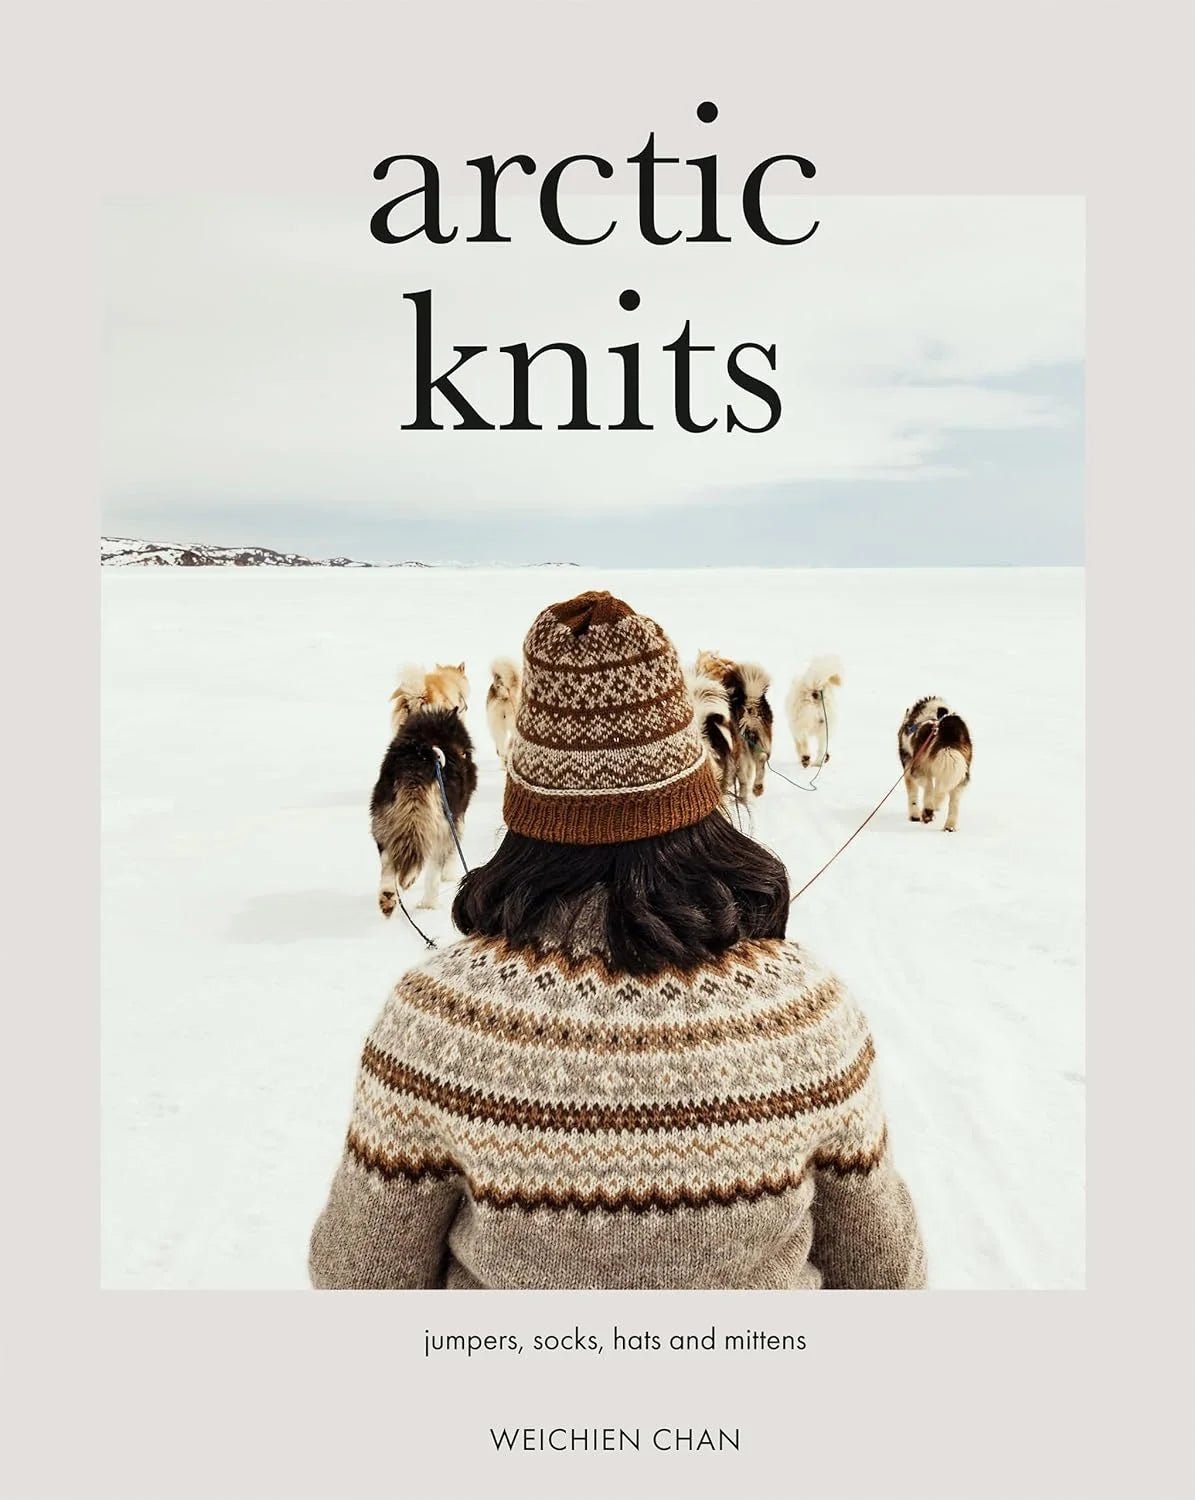 Arctic Knits: Jumpers, Socks, Mittens, and More - Weichien Chan - The Little Yarn Store